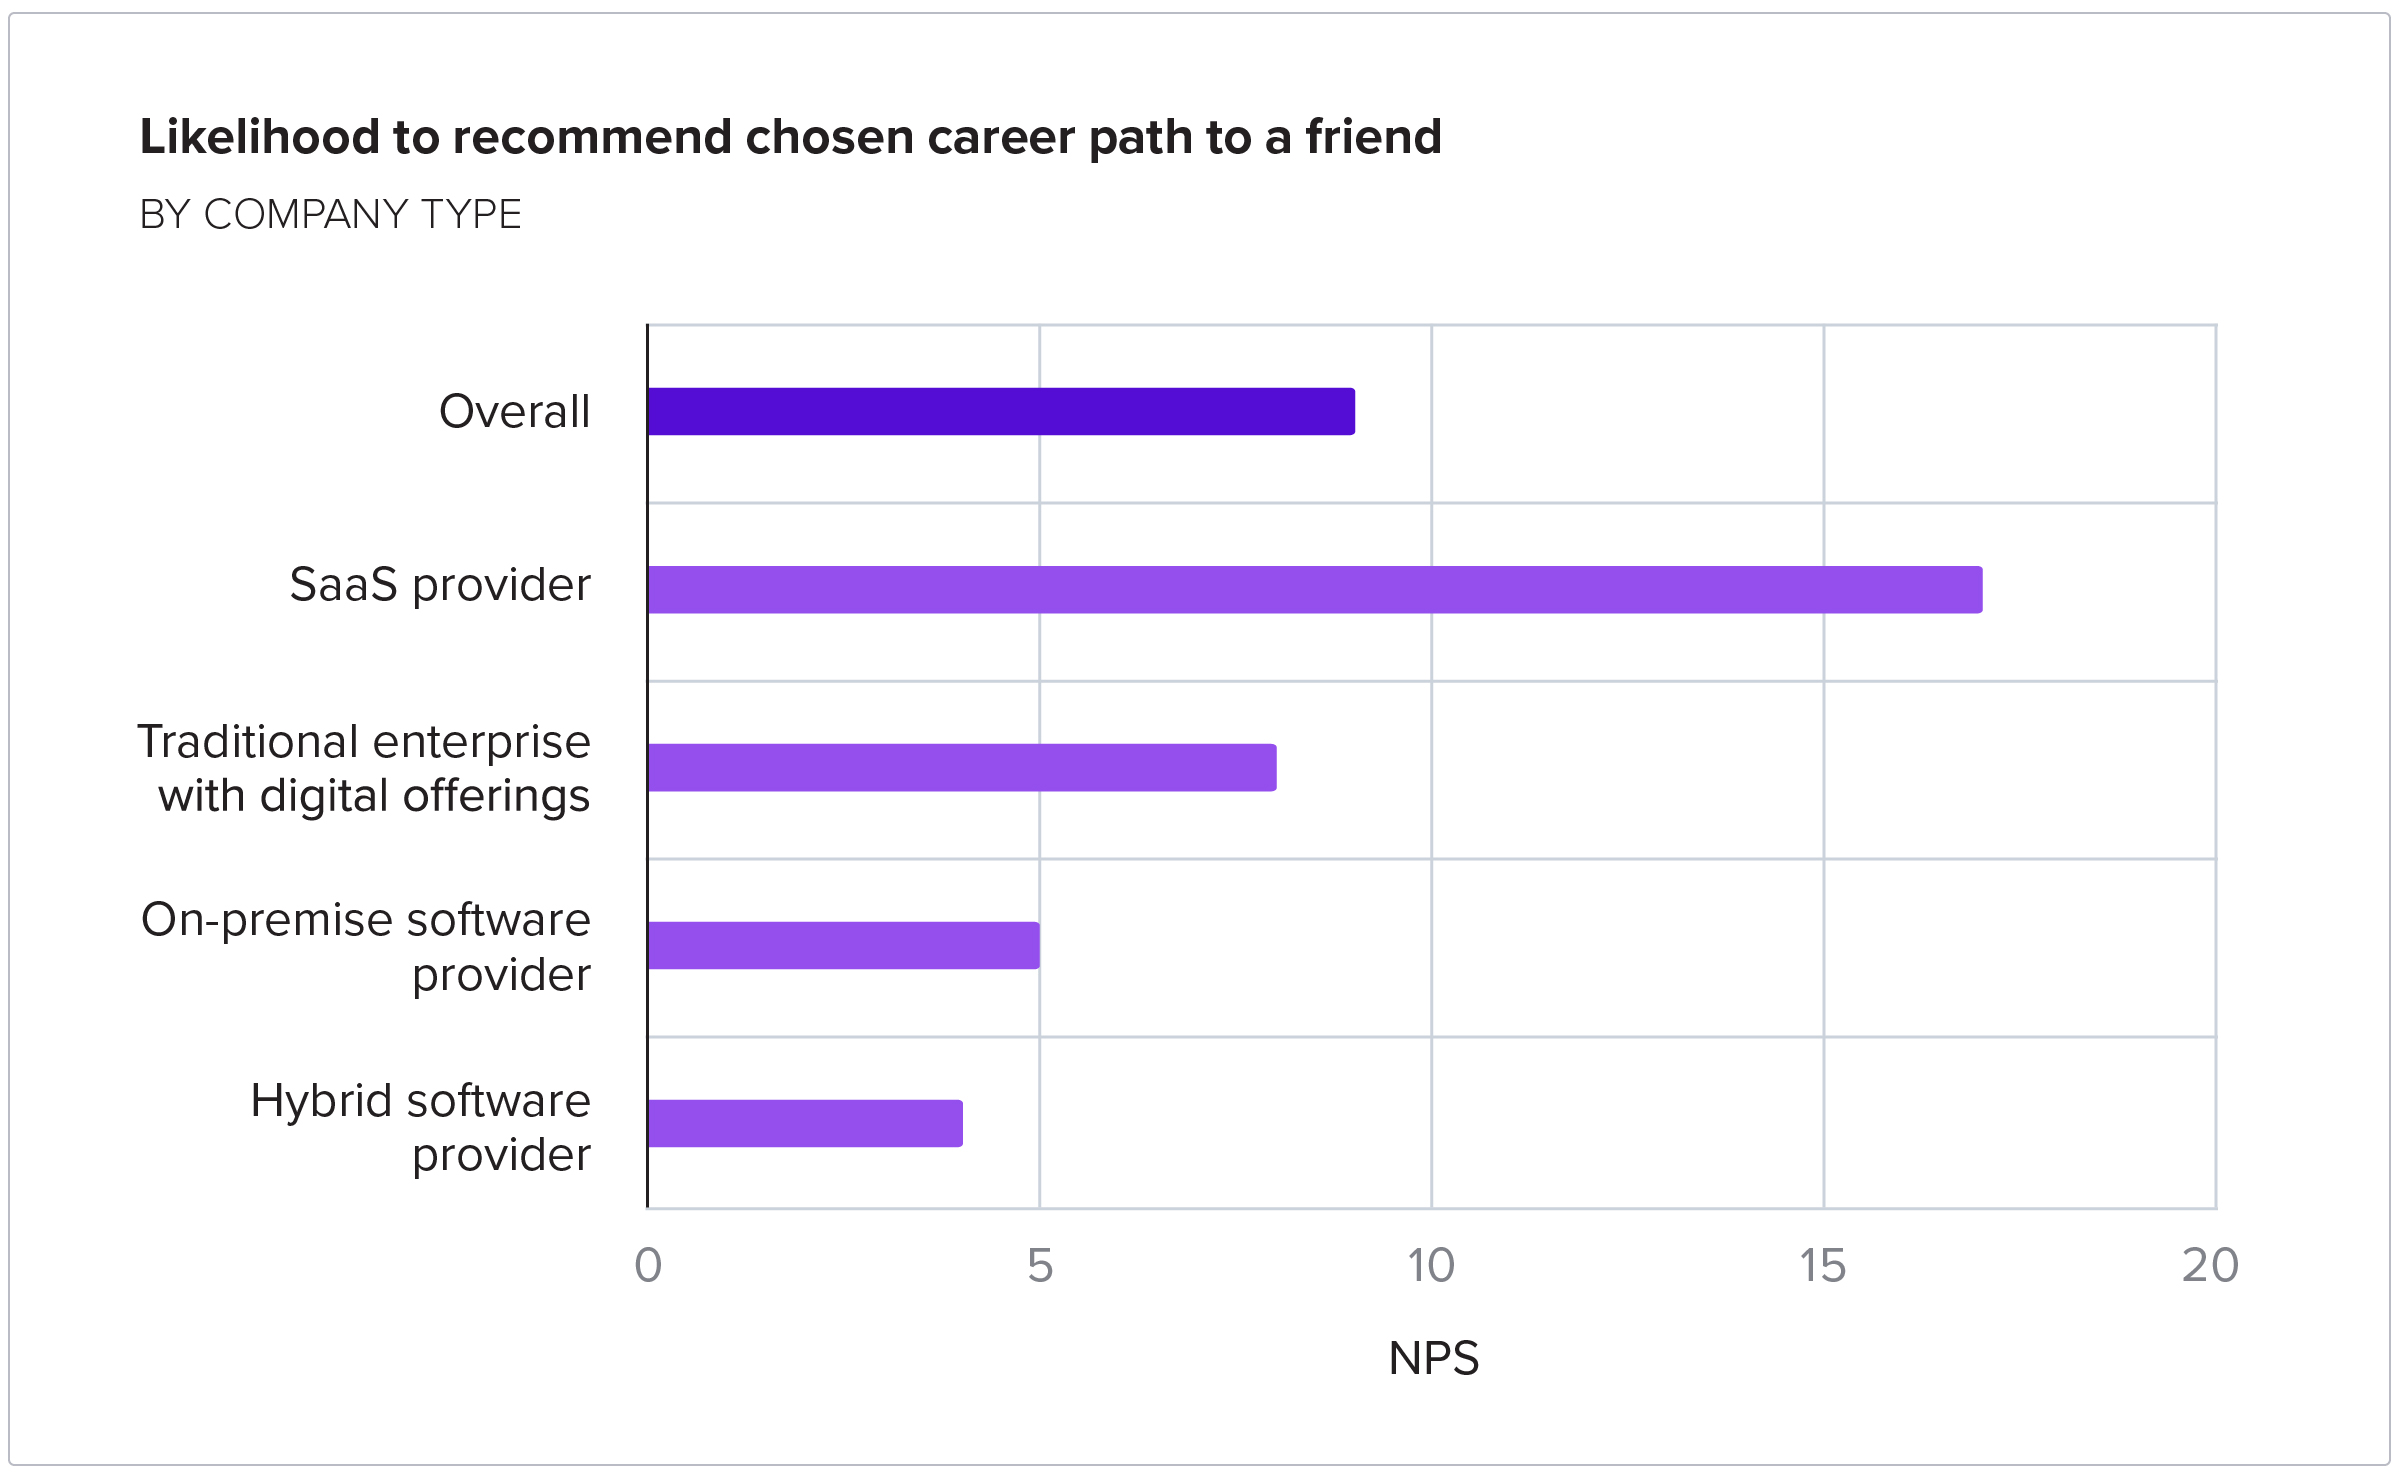 Likelihood to recommend chosen career path to a friend by company type